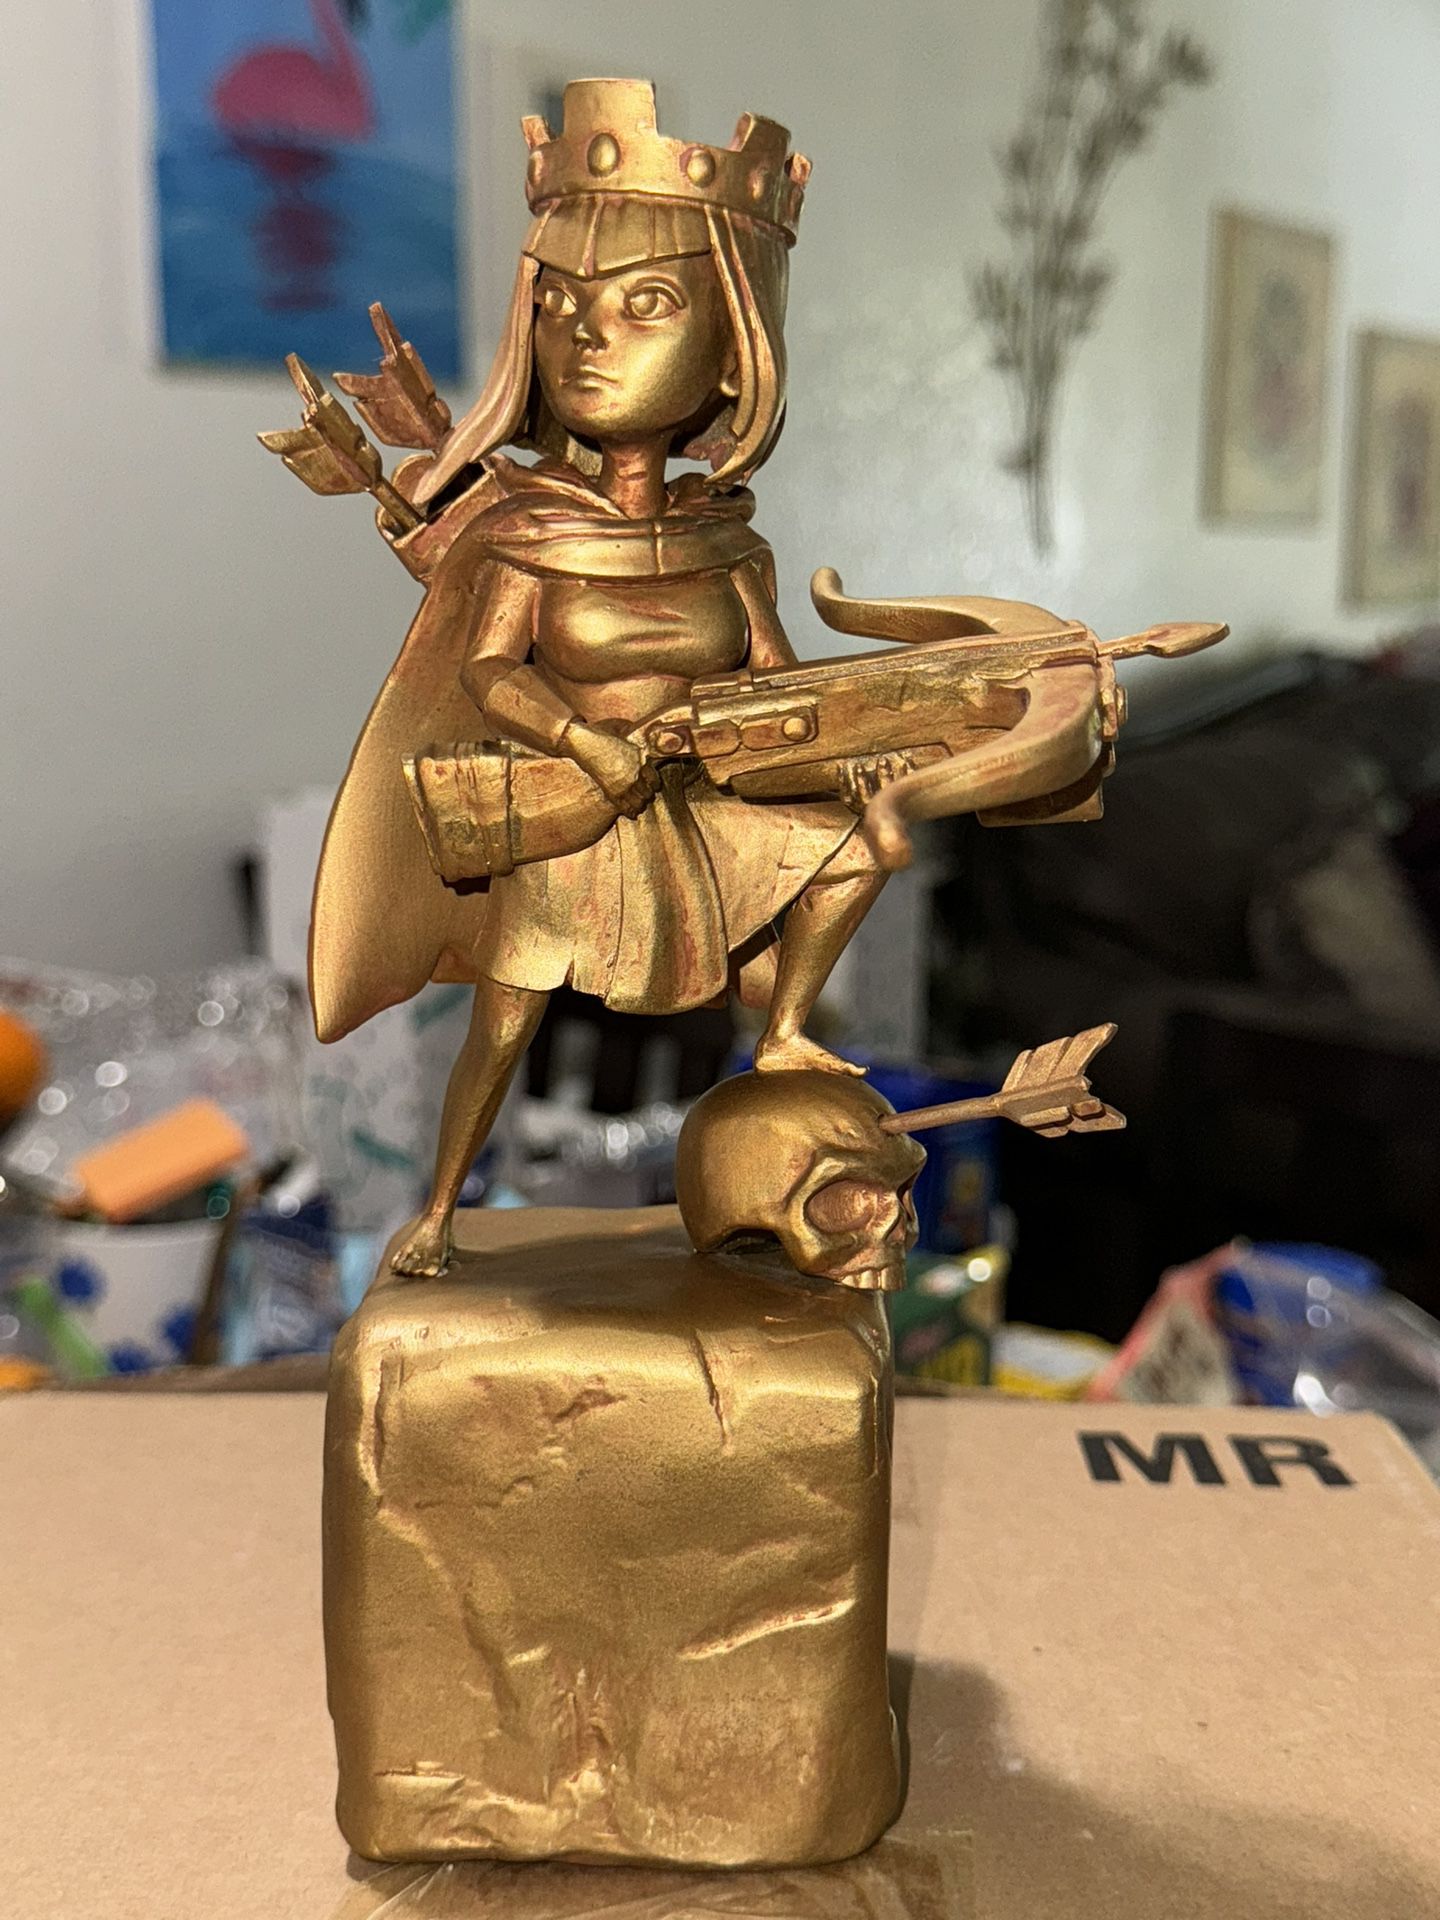 Limited Edition Clash Of Clans Archer Queen Statue